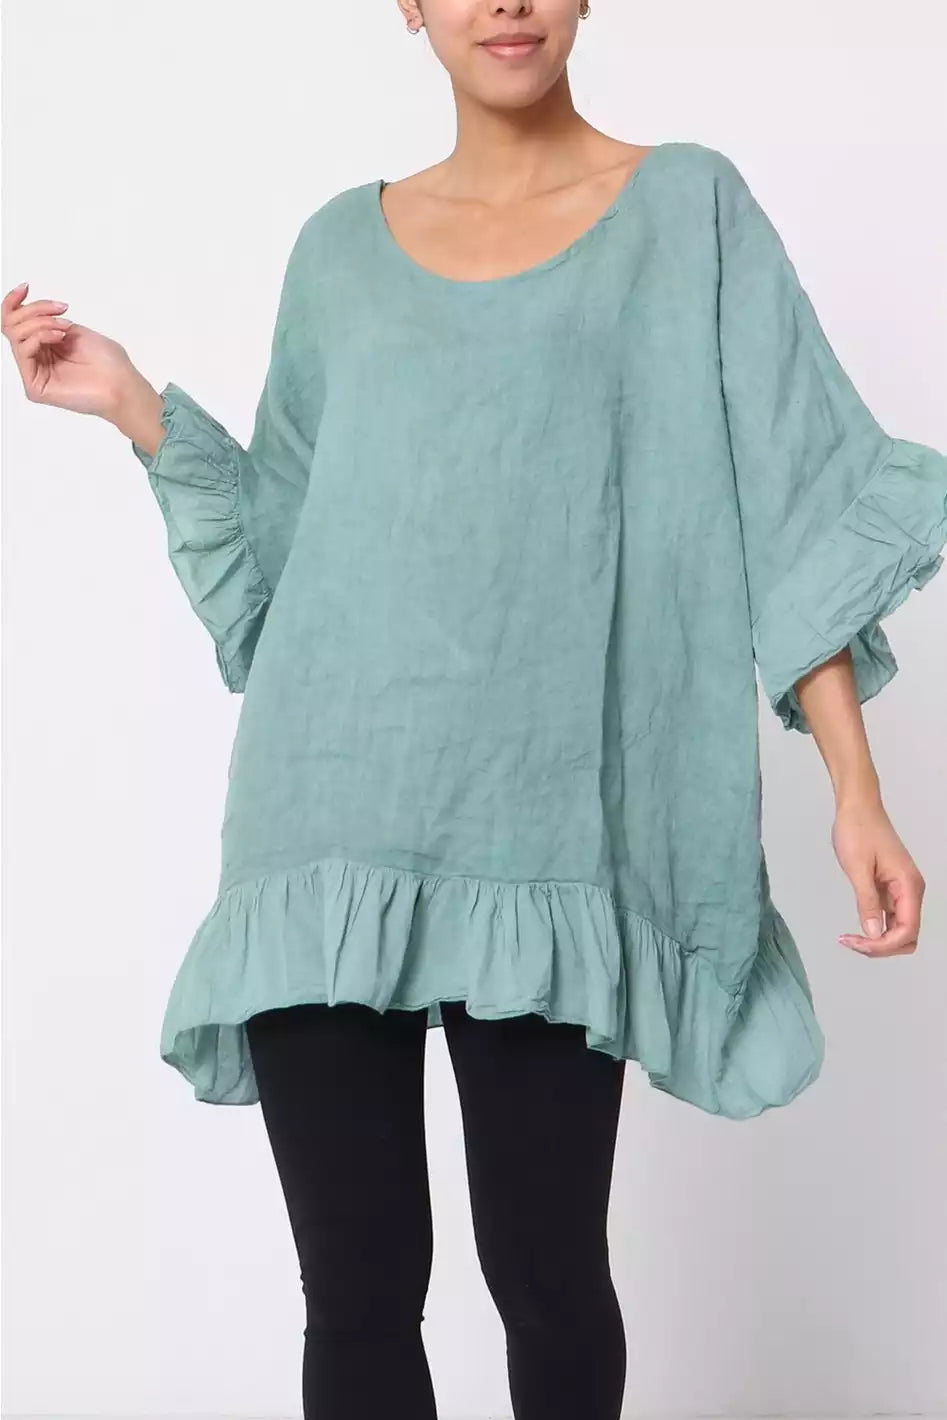 Over-size breezy tunic with ruffled edges